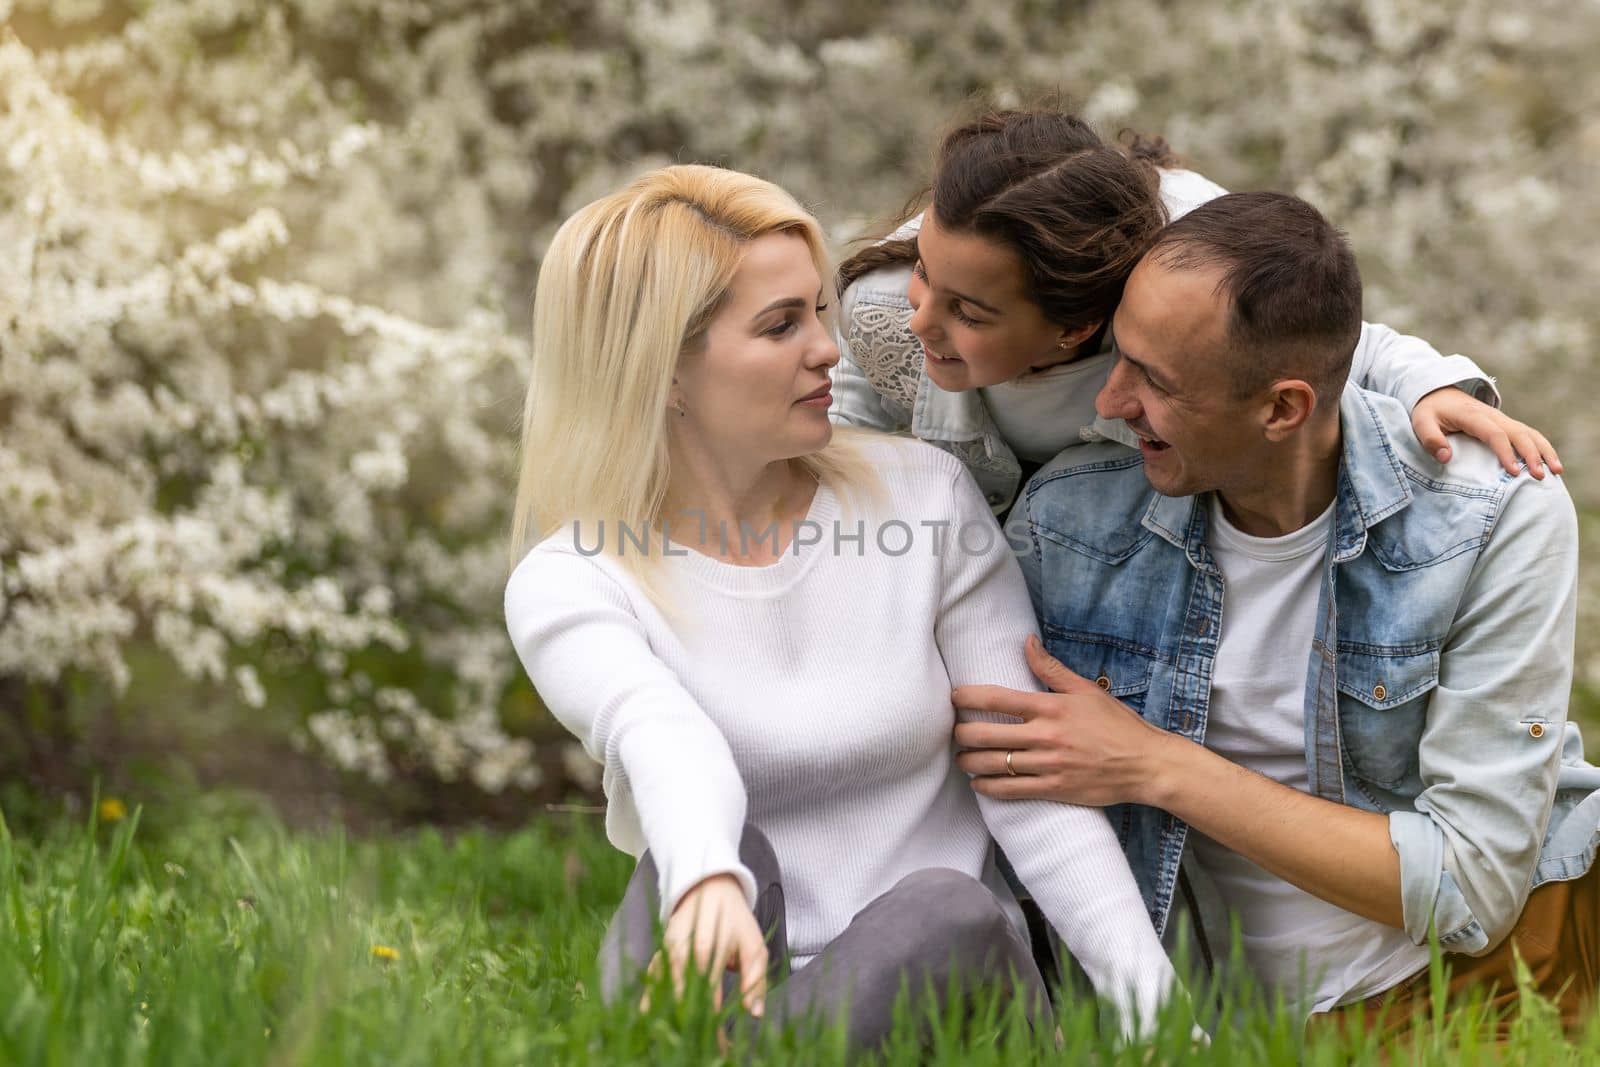 Happy family outdoors spending time together. Father, mother and daughter are having fun on a green floral grass. by Andelov13